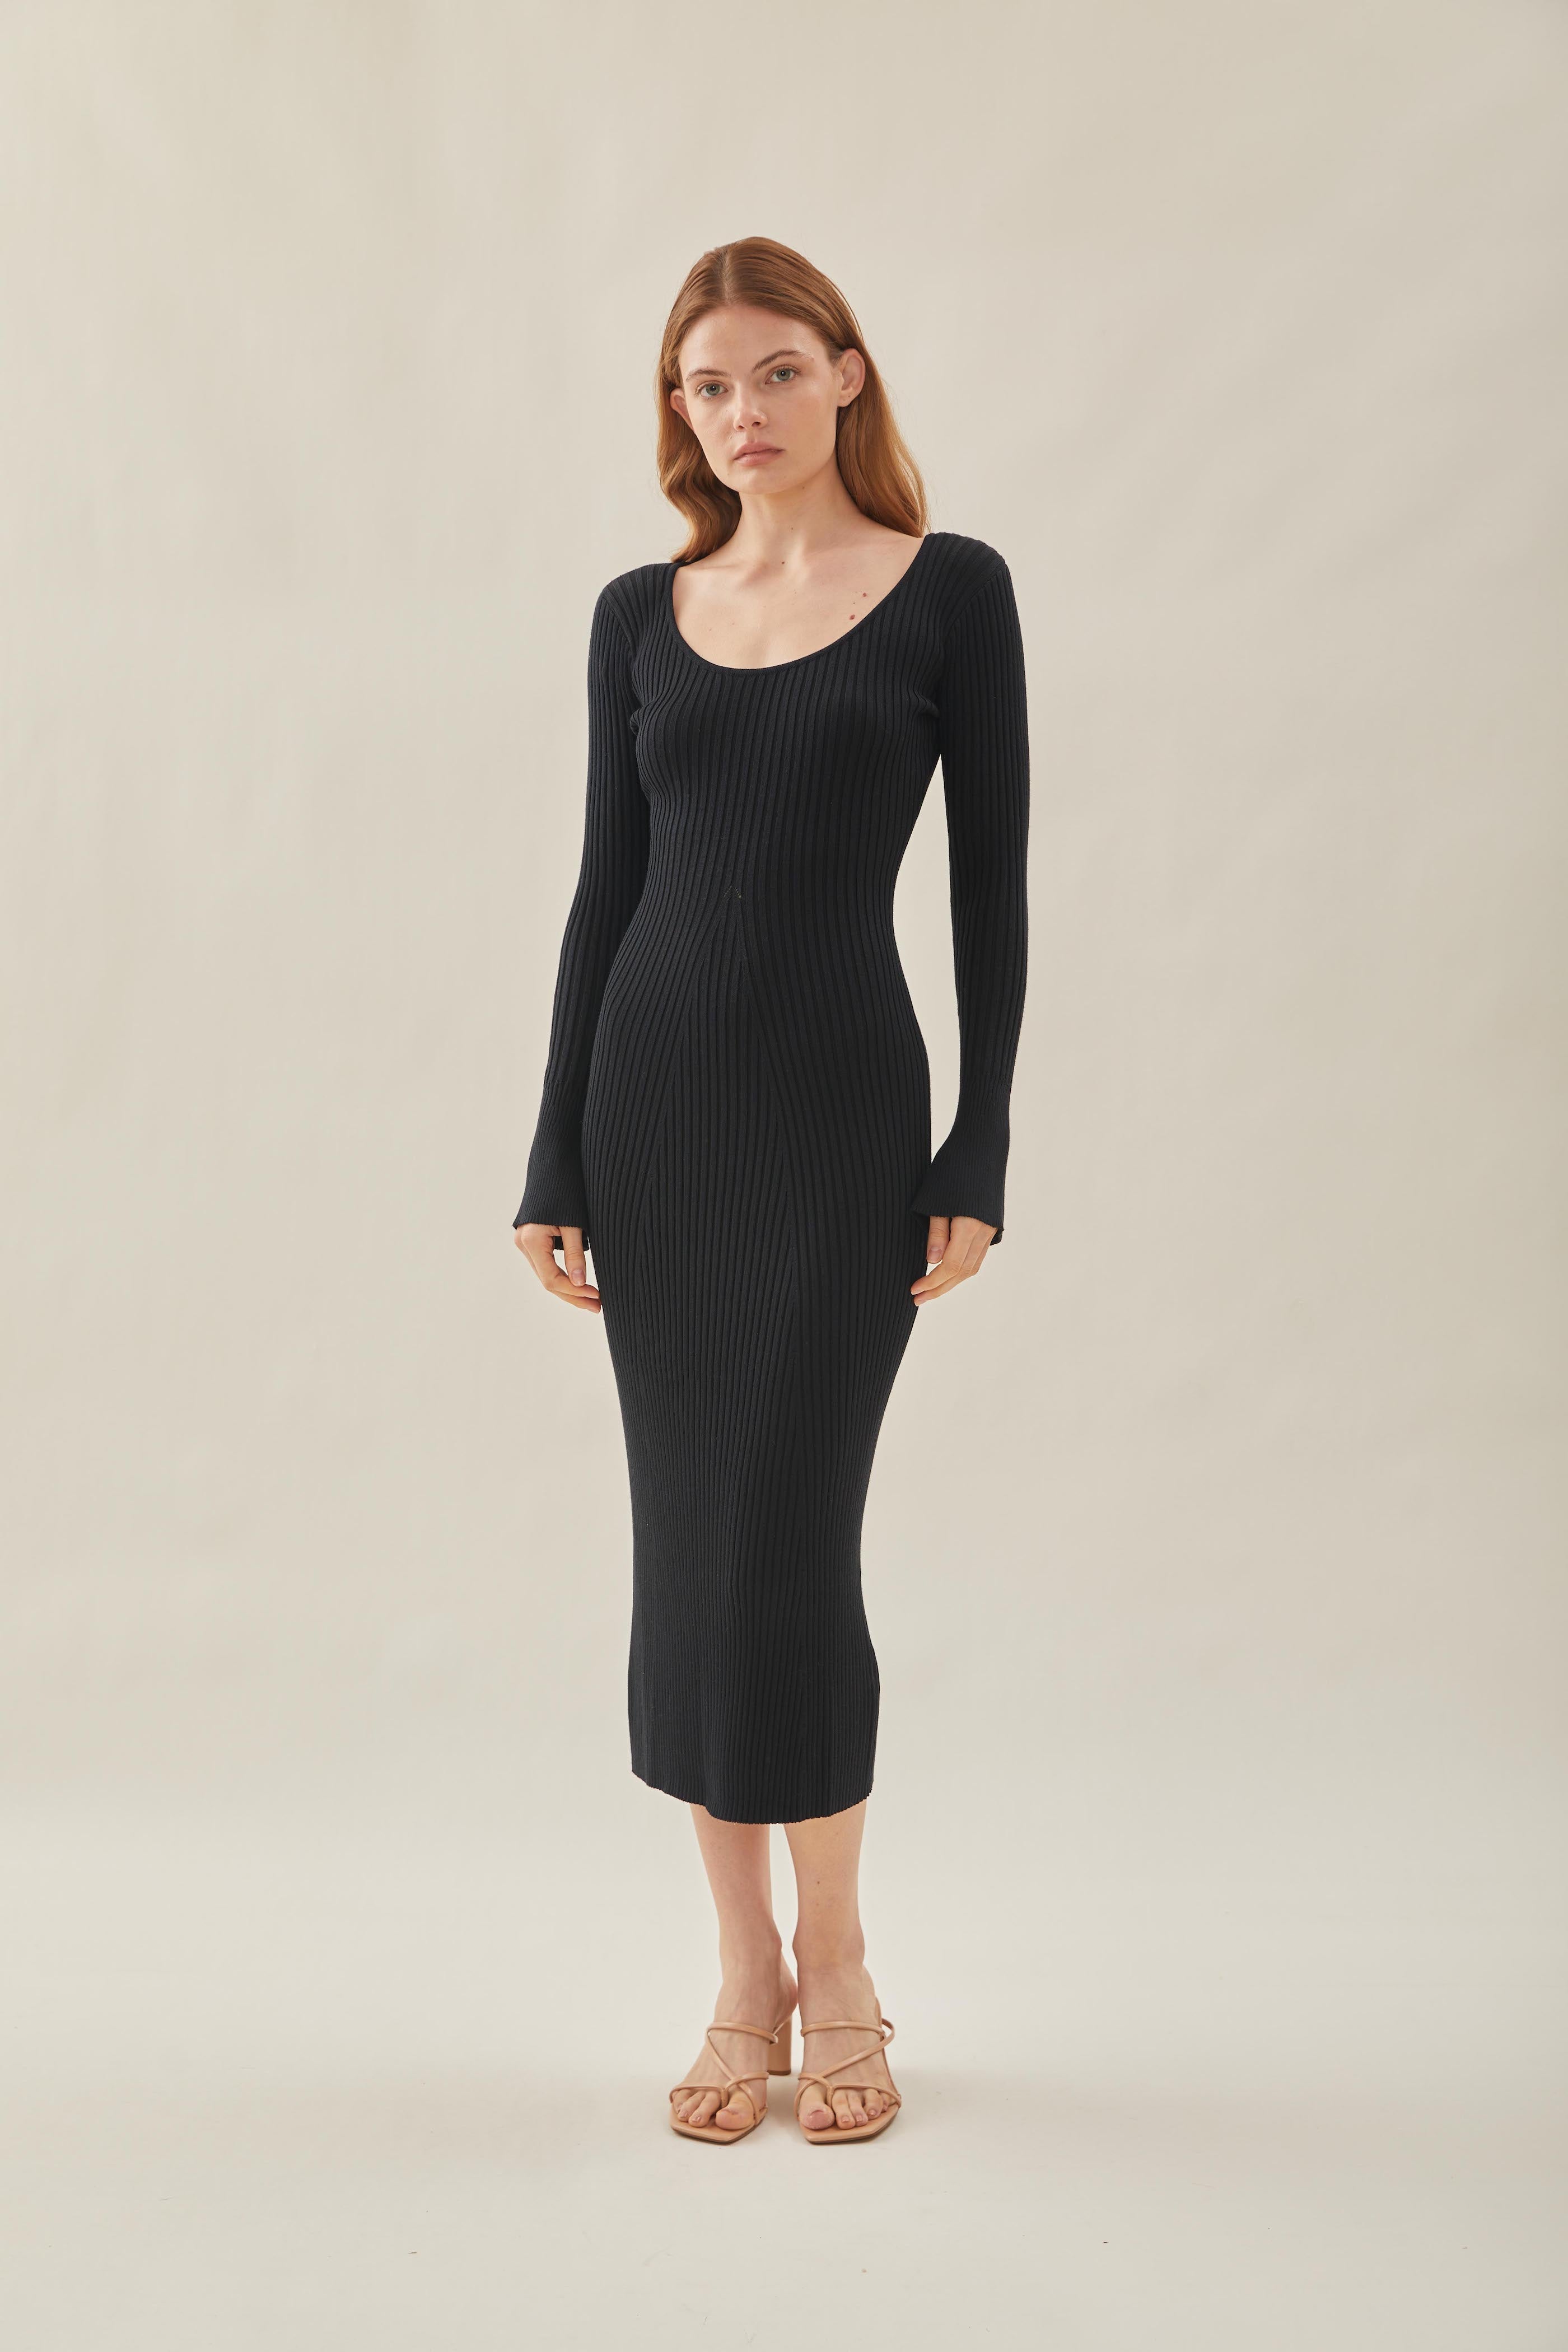 Scooped Neck Sleeved Ribbed Knit Dress in Black